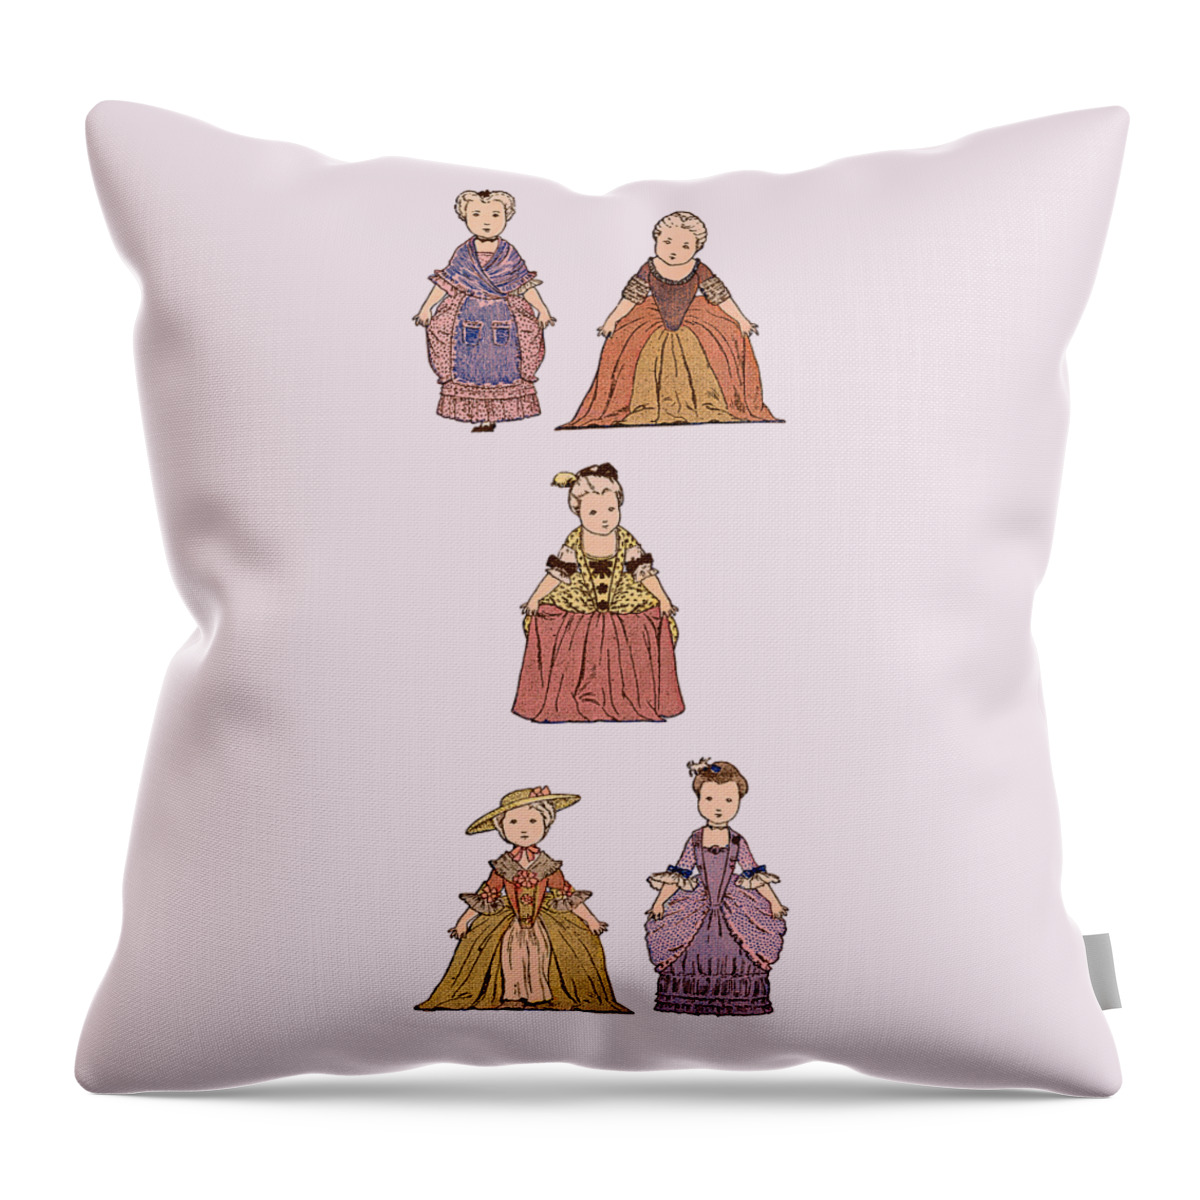 Girl Throw Pillow featuring the digital art Girls With Elegant Victorian Dresses by Madame Memento